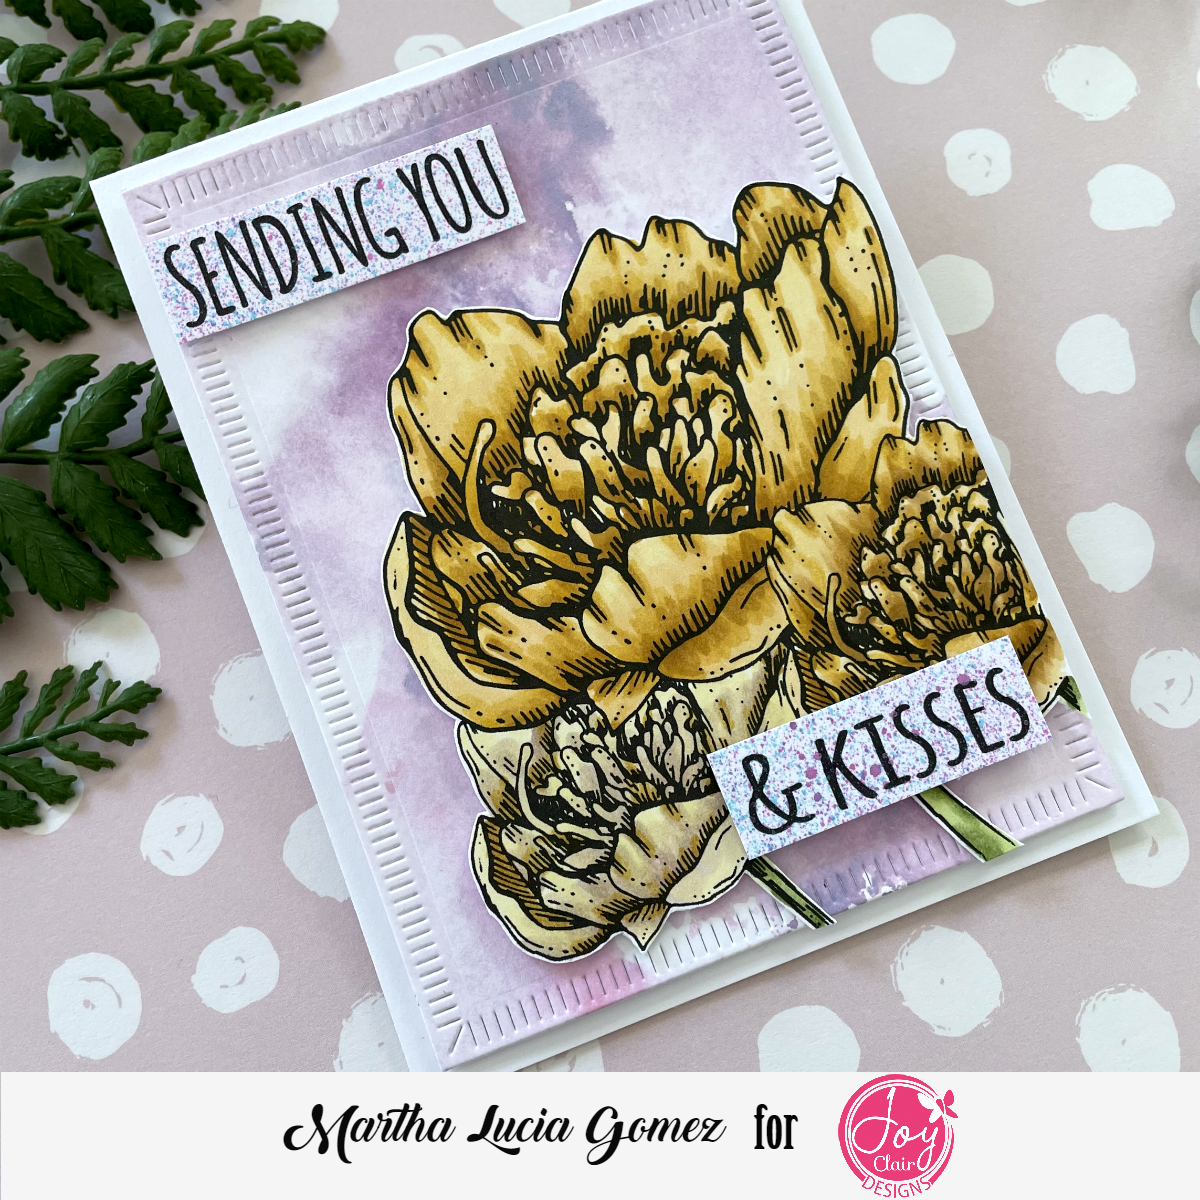 Card inspiration and Flash Sale!